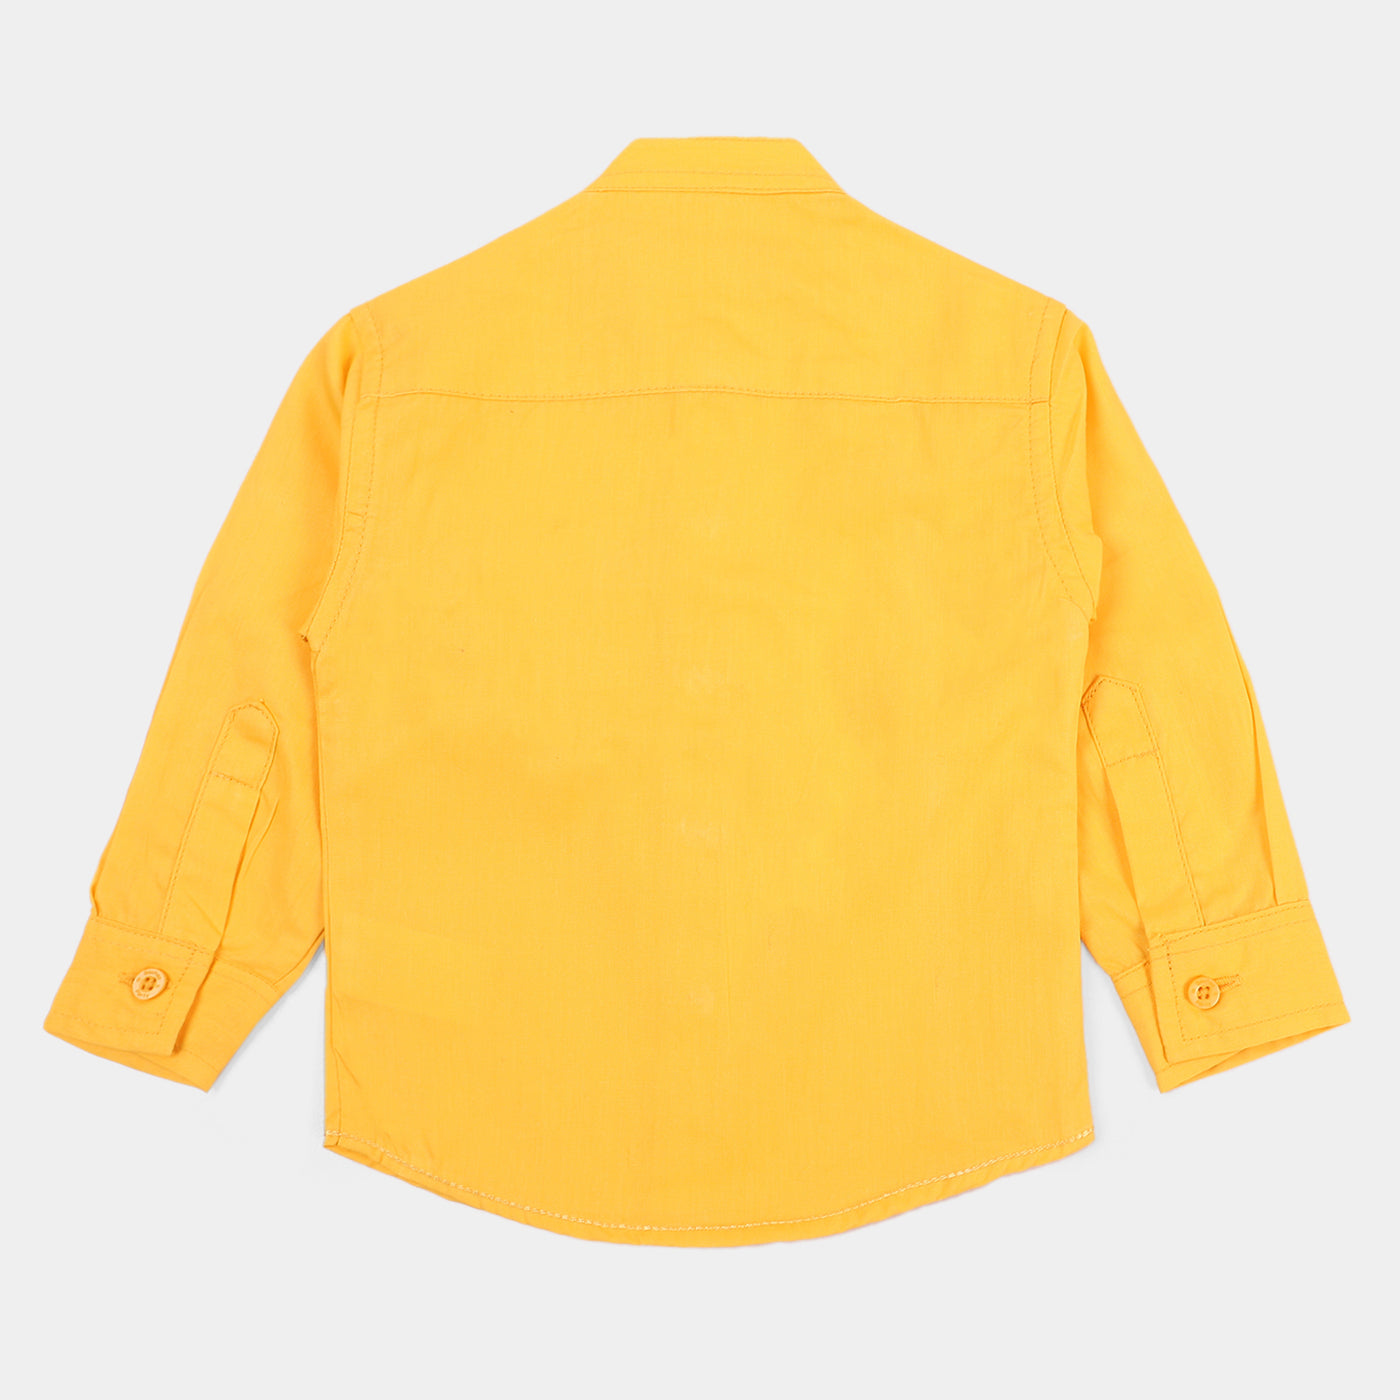 Infant Boys Yarn Dyed Shirt Holiday In Camp - Yellow